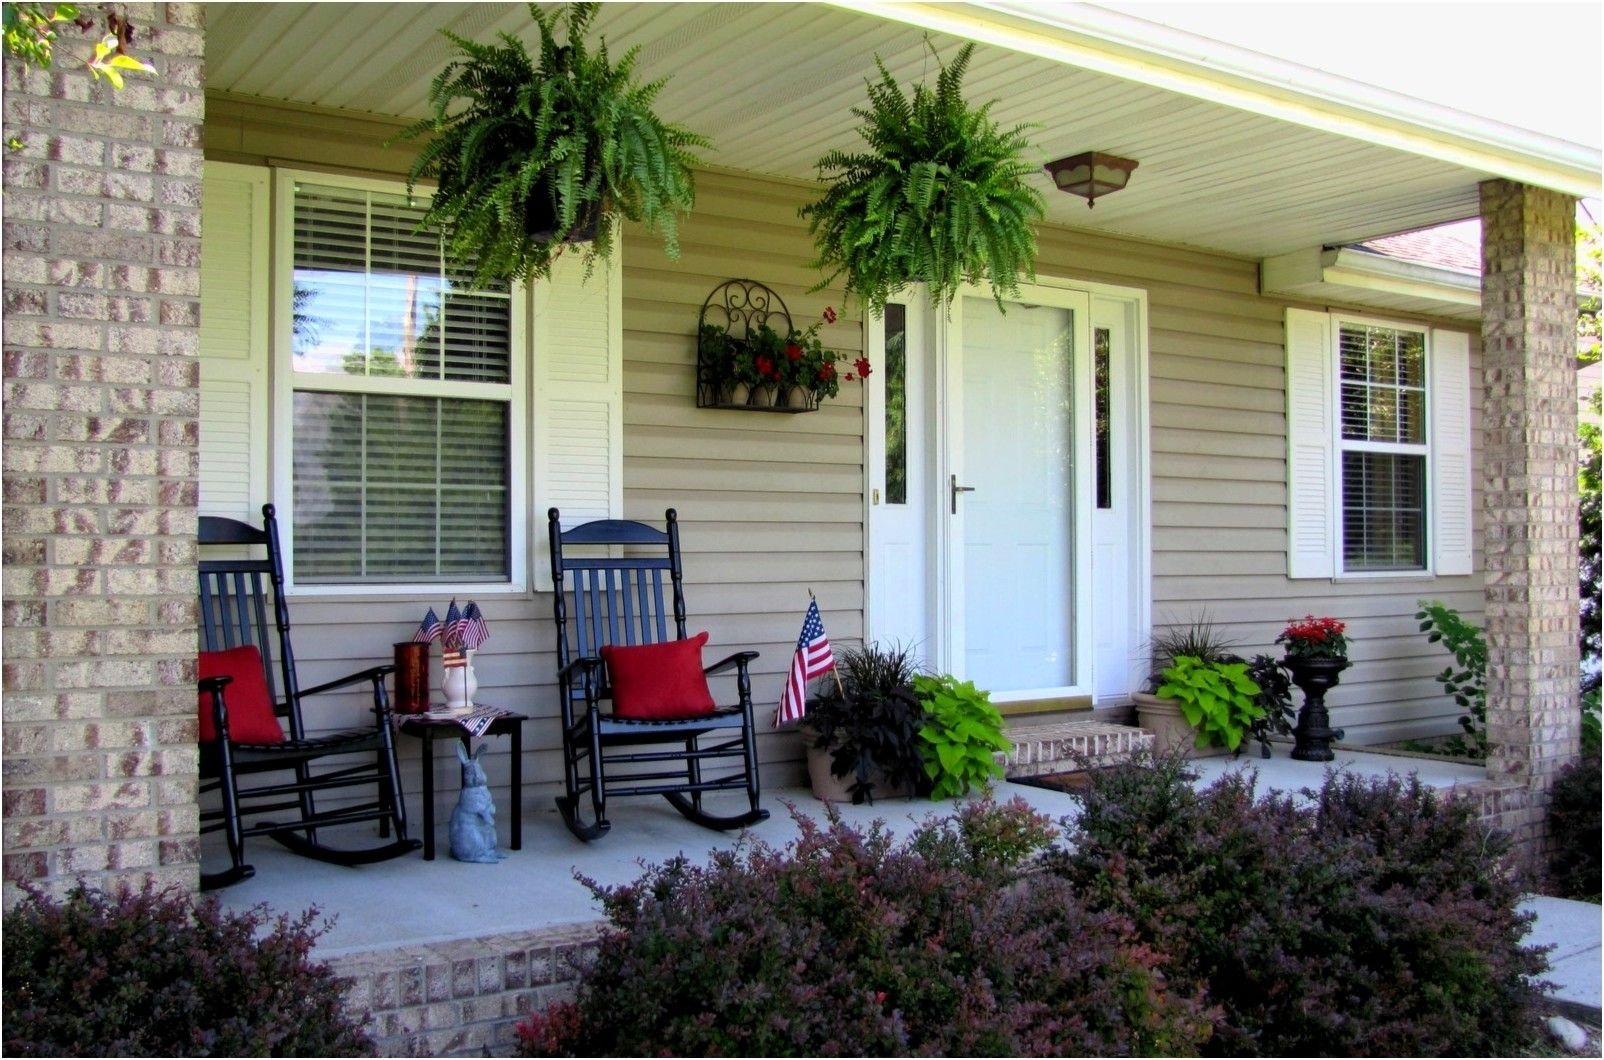 10 Cute Front Porch Ideas And More front porch decor ideas google search front porch ideas 2022